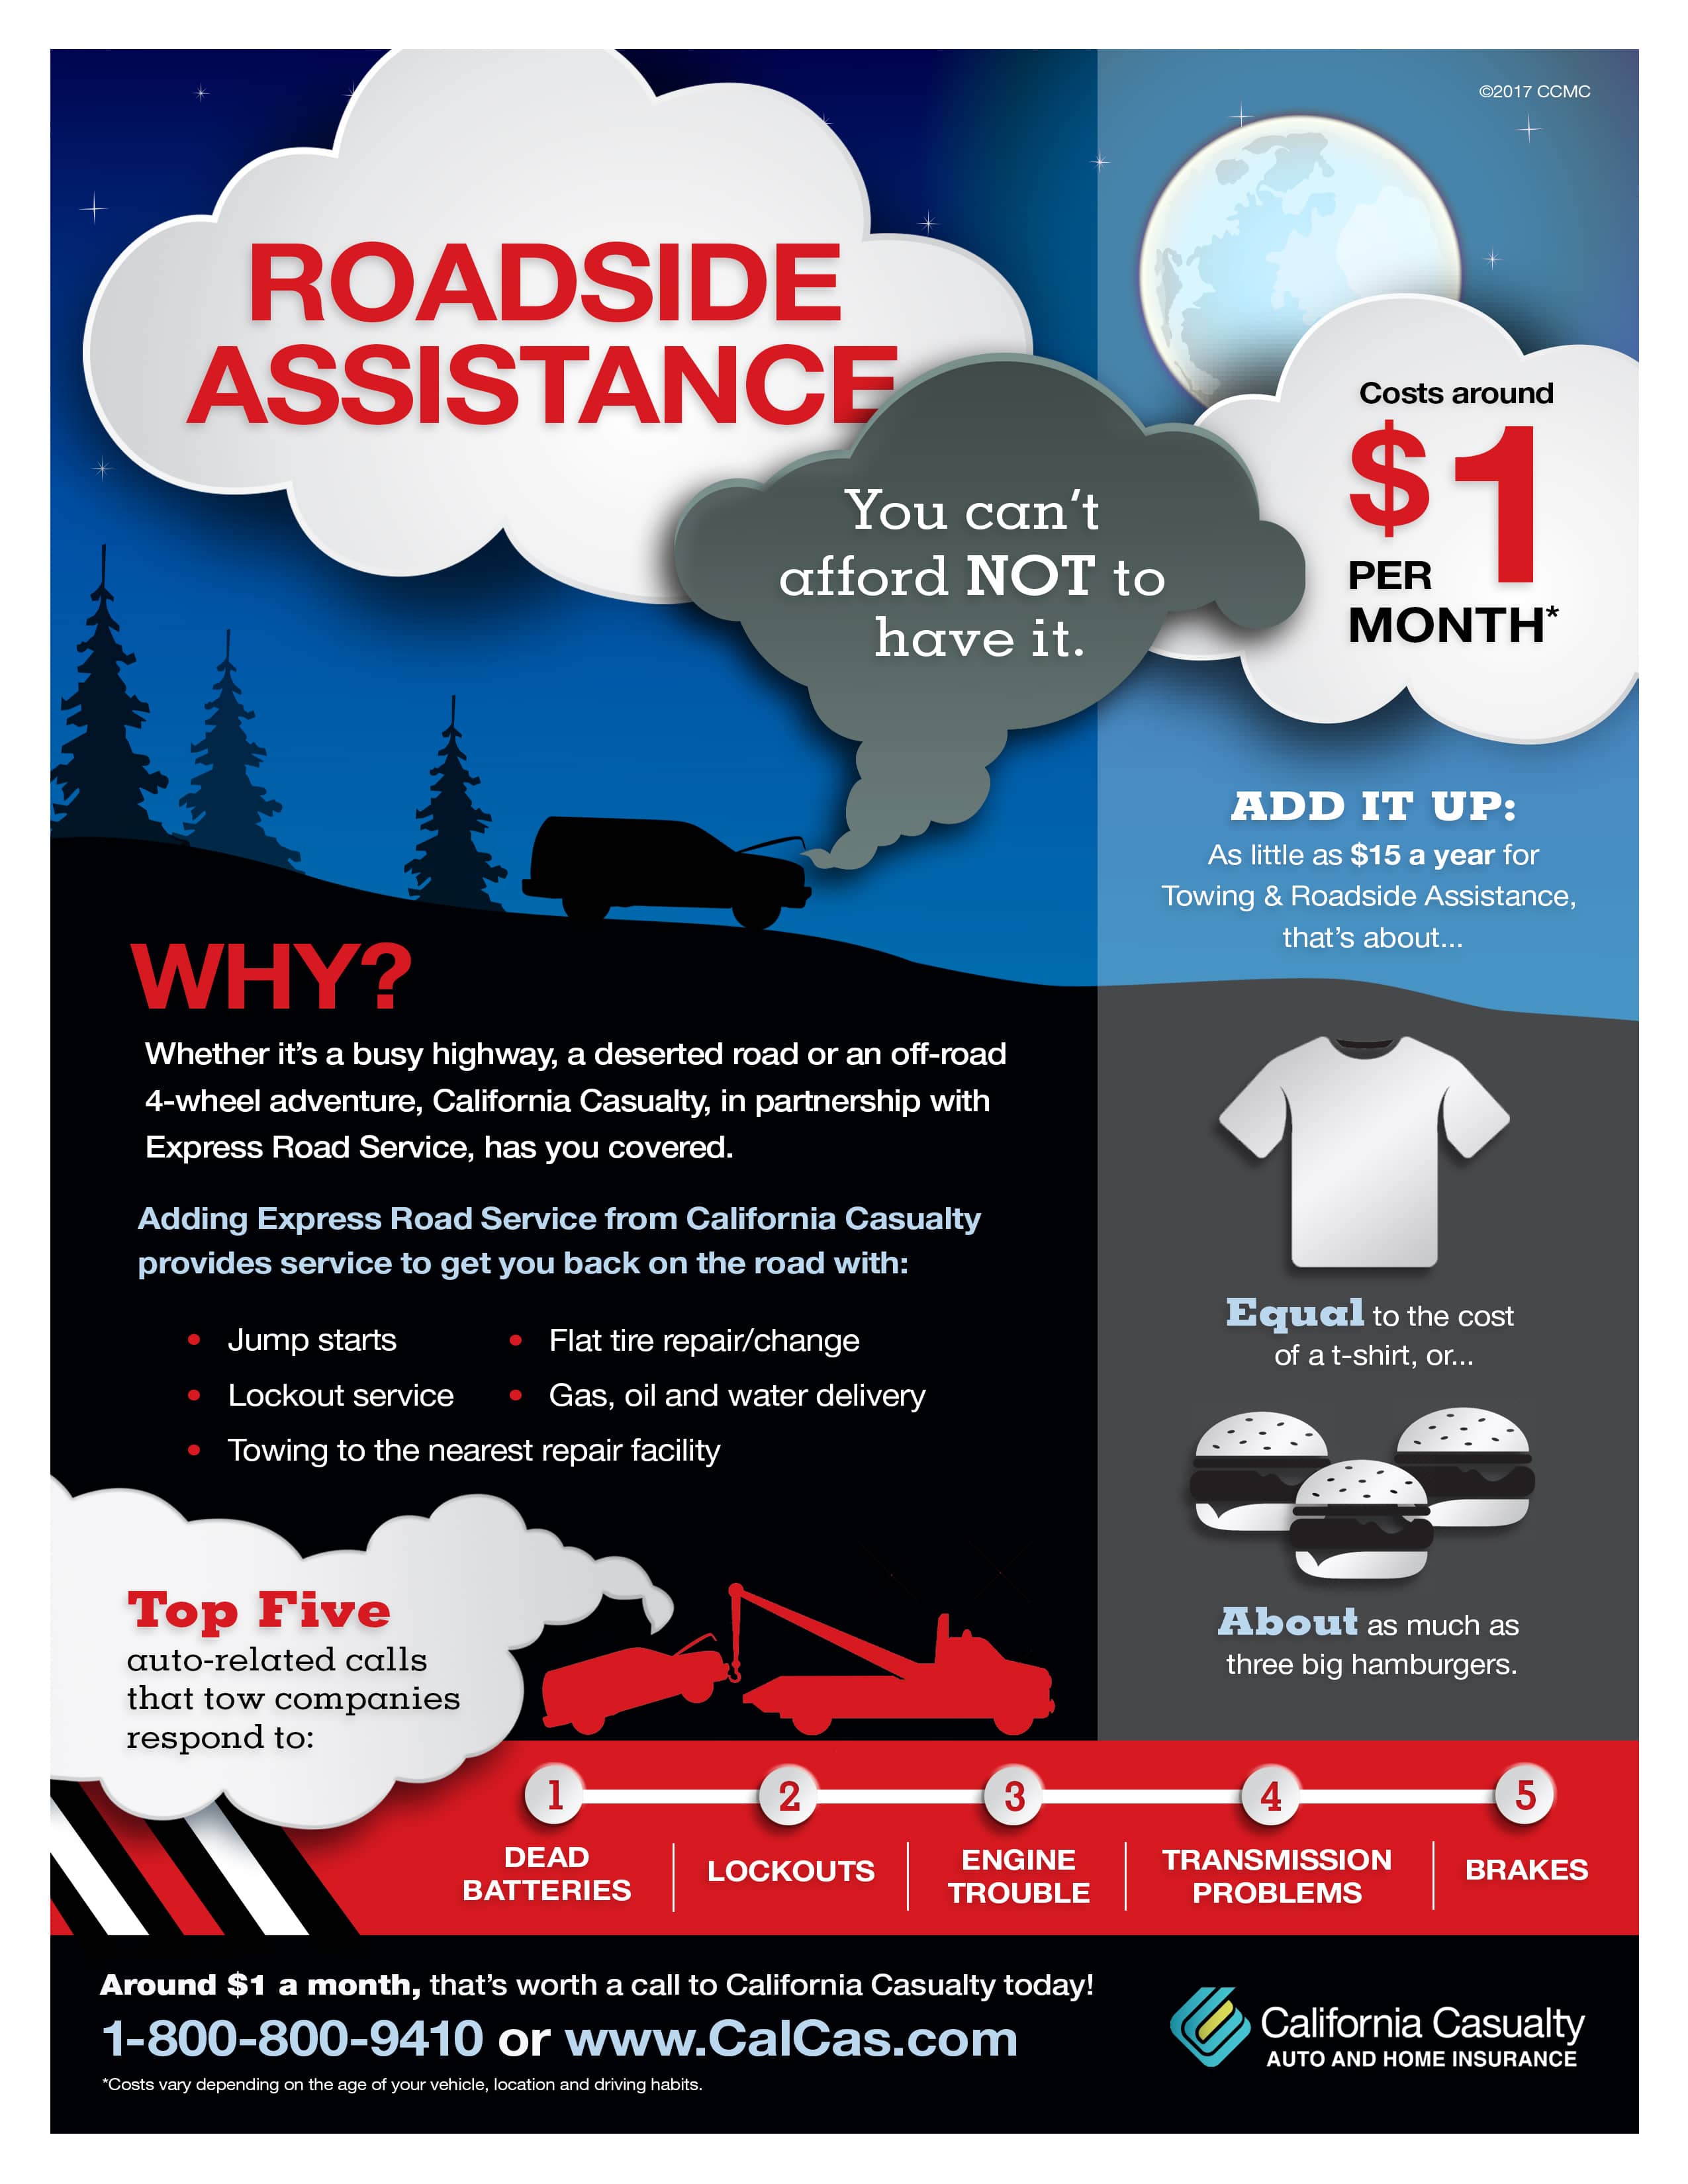 Towing and Roadside Assistance - How it helps